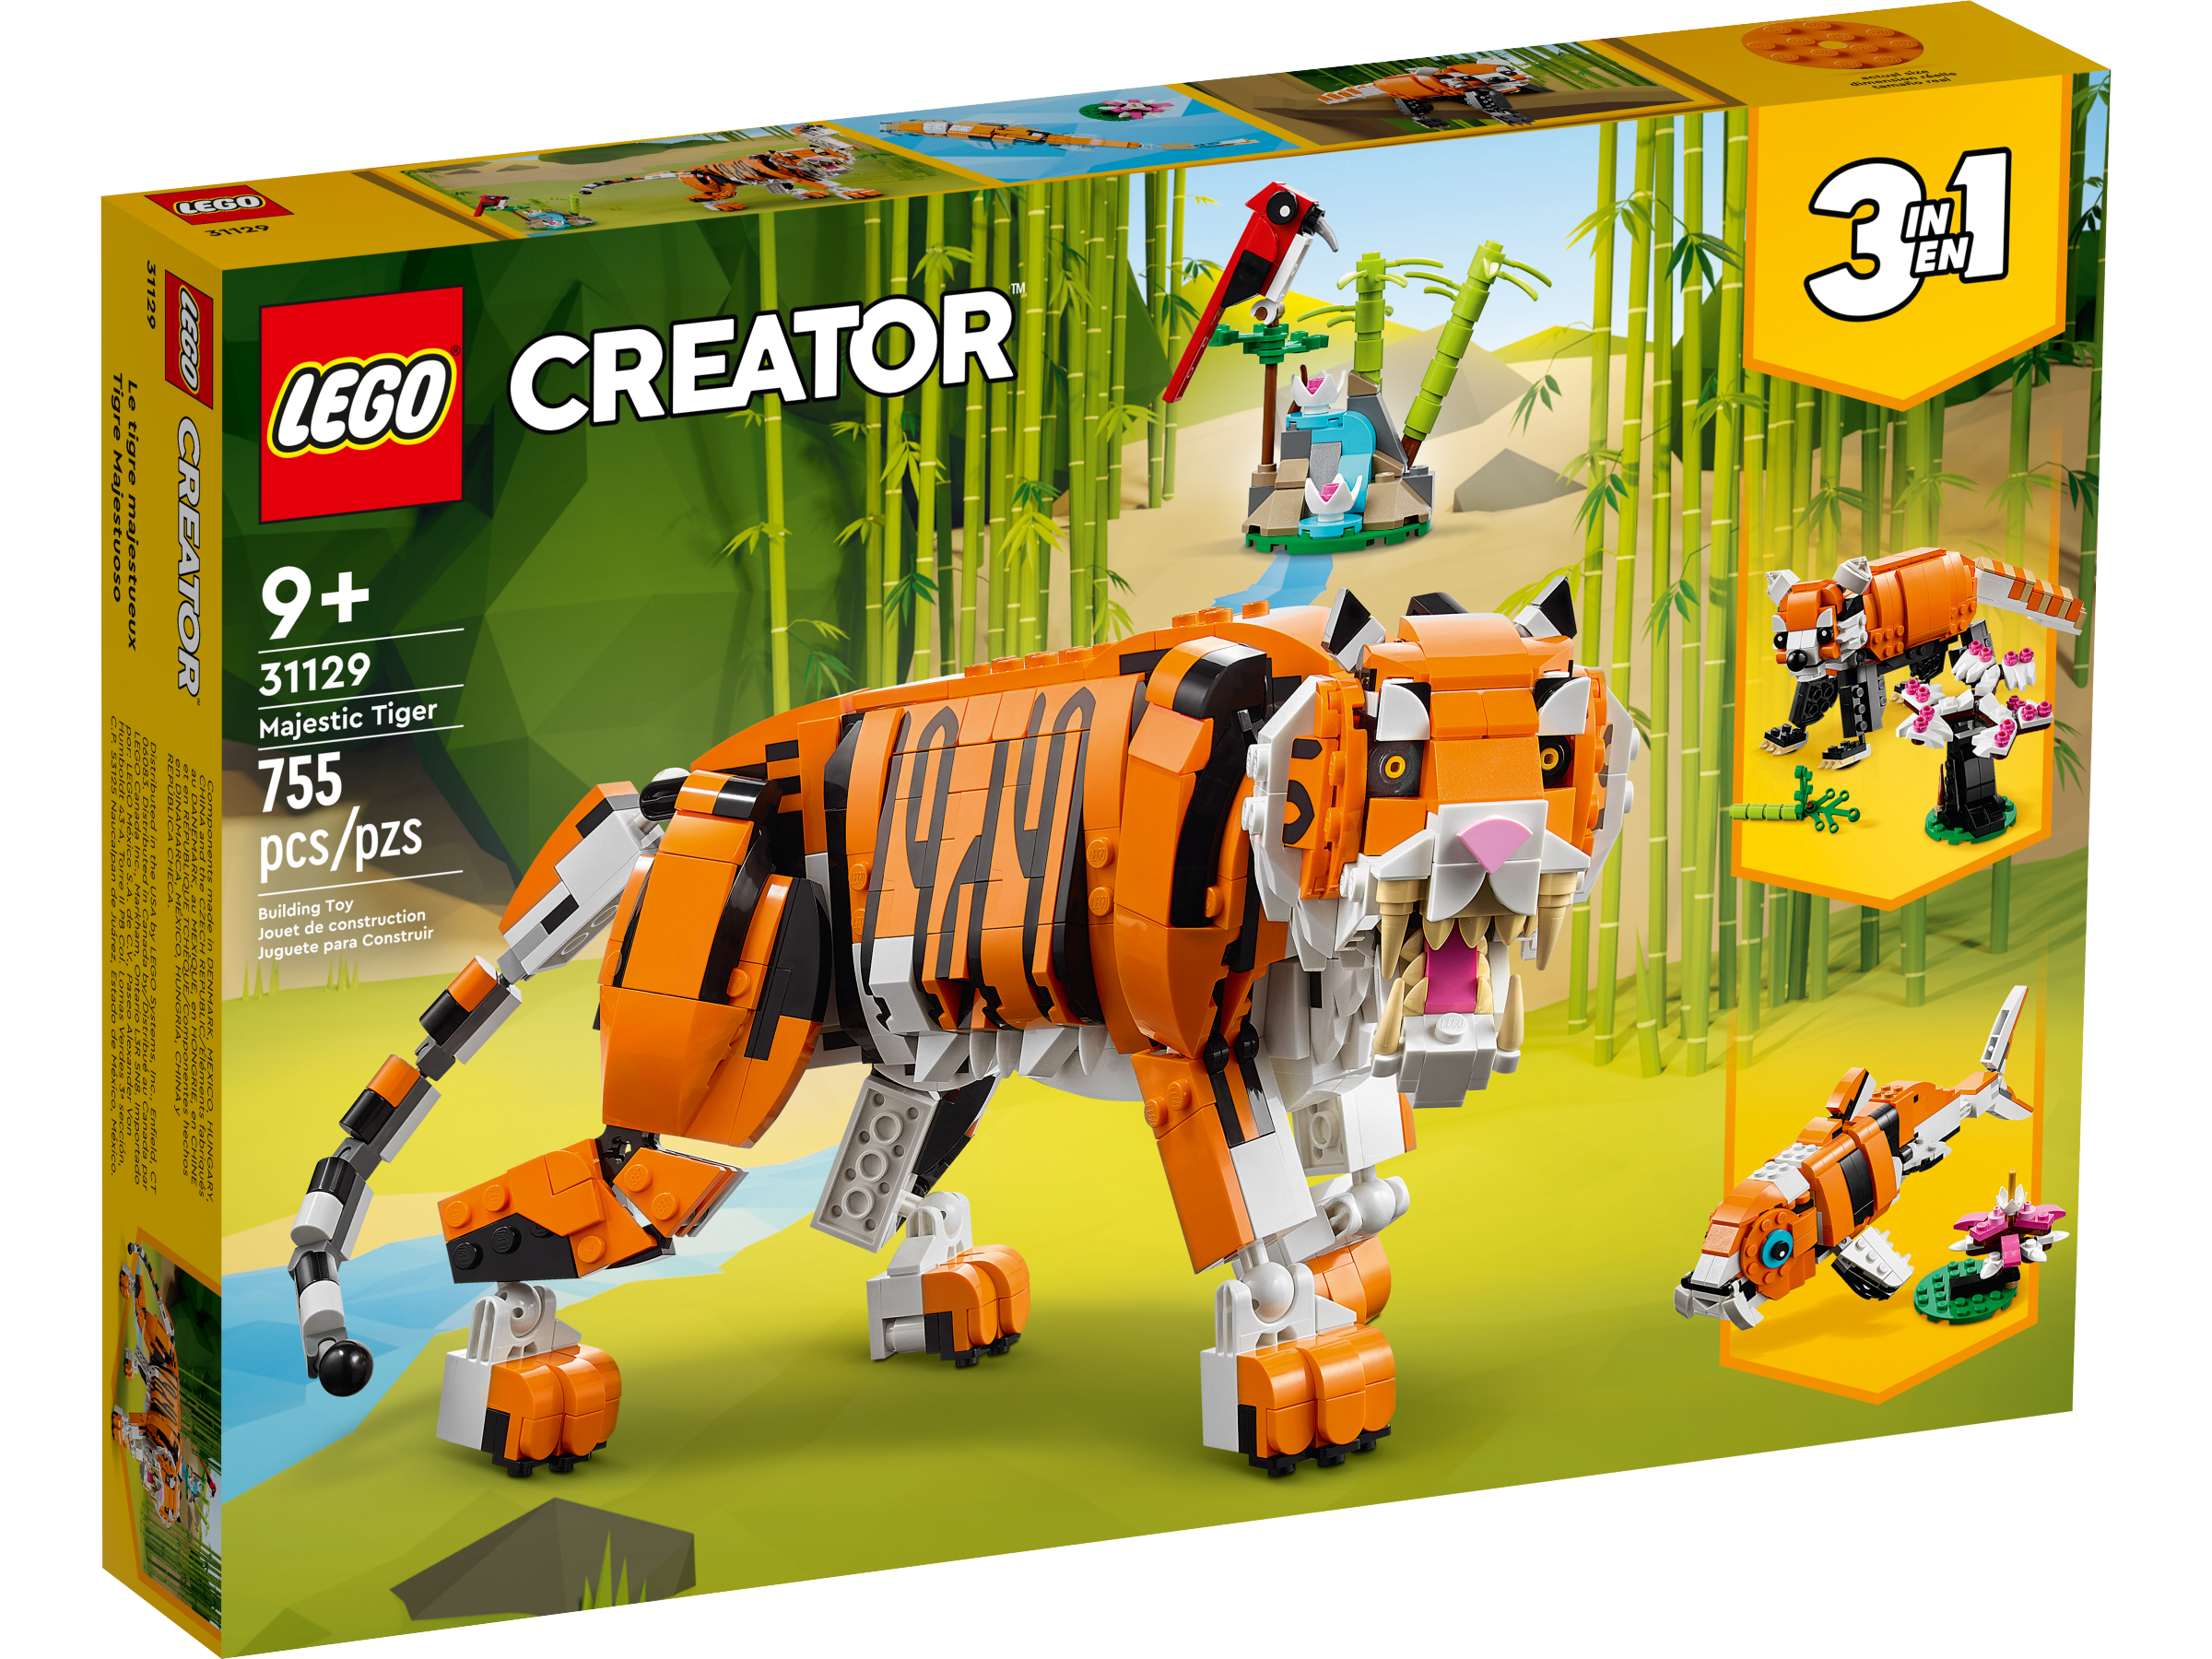 Majestic Tiger 31129 | Creator 3-in-1 | Buy online at the Official 